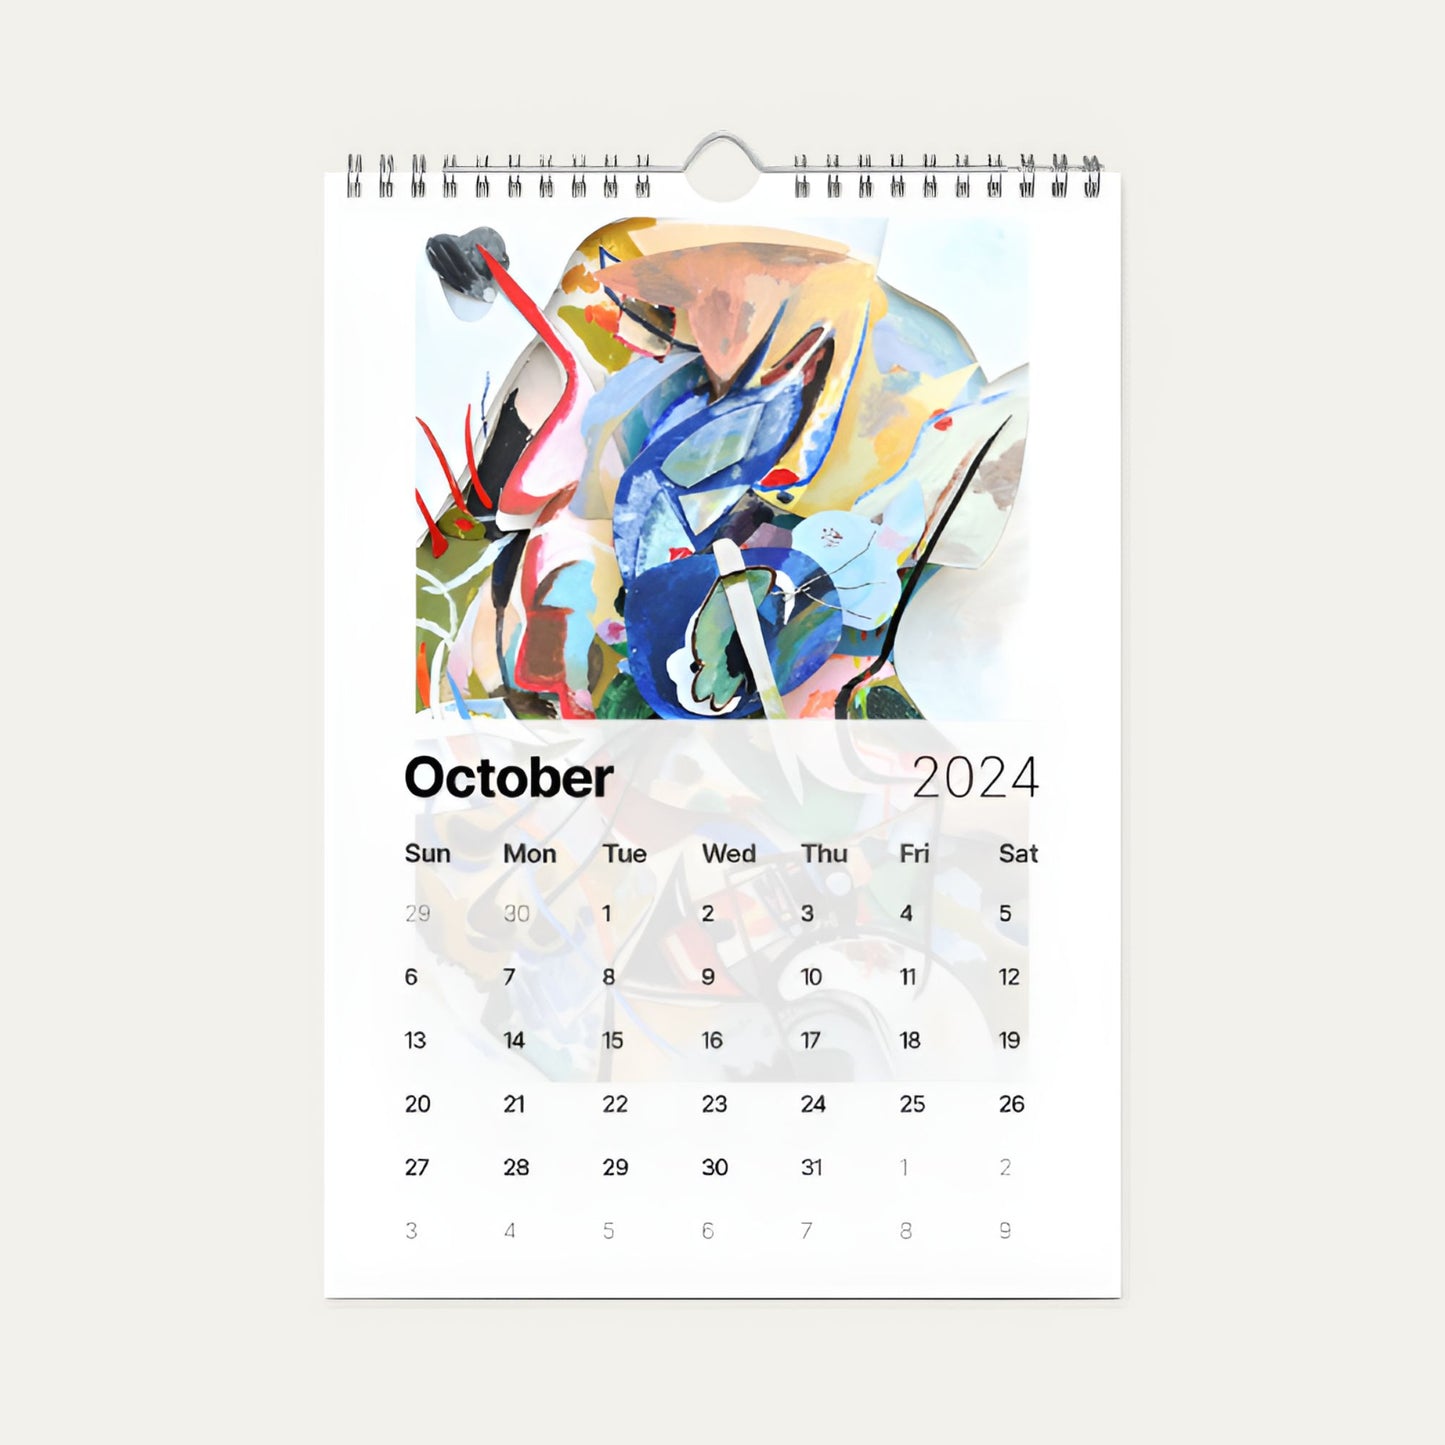 2024 Wall Calendar with Wassily Kandinsky's Selected Artwork